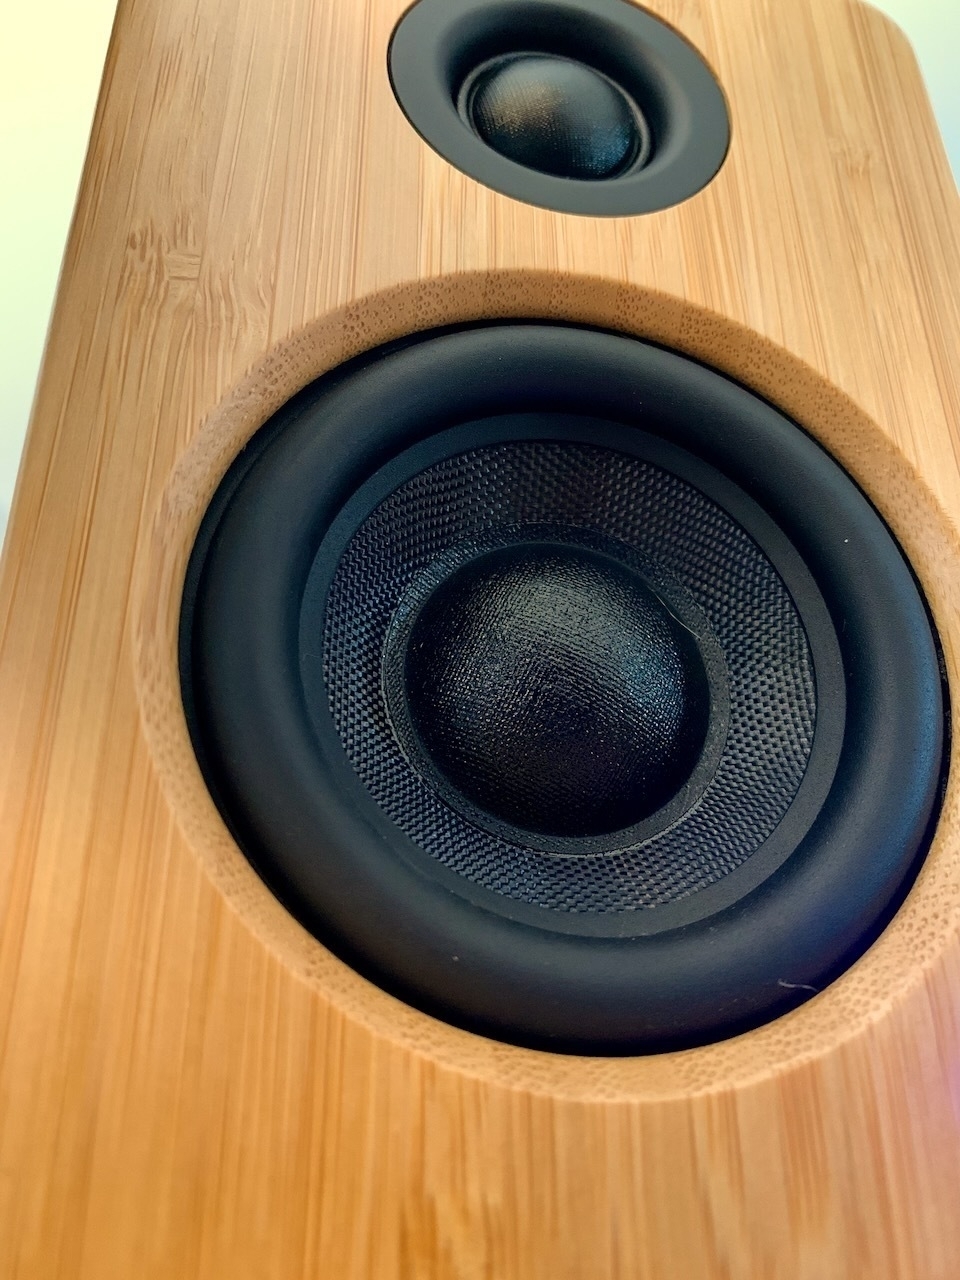 Close-up of a single speaker, with a bamboo cabinet, and a single tweeter and a single woofer visible